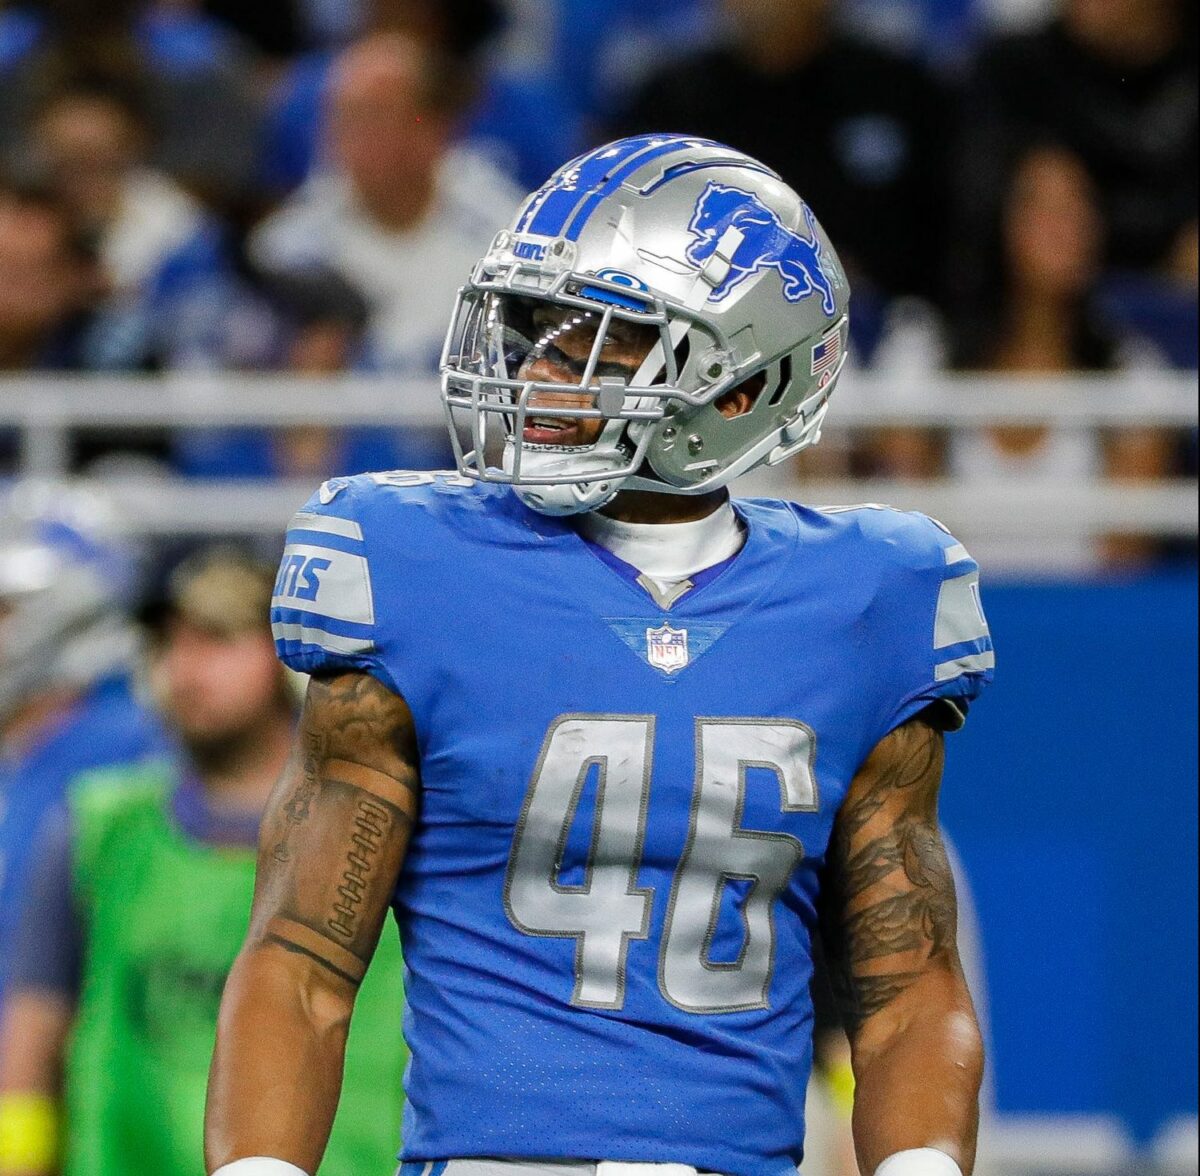 Lions reveal free agent jersey numbers and veteran number changes